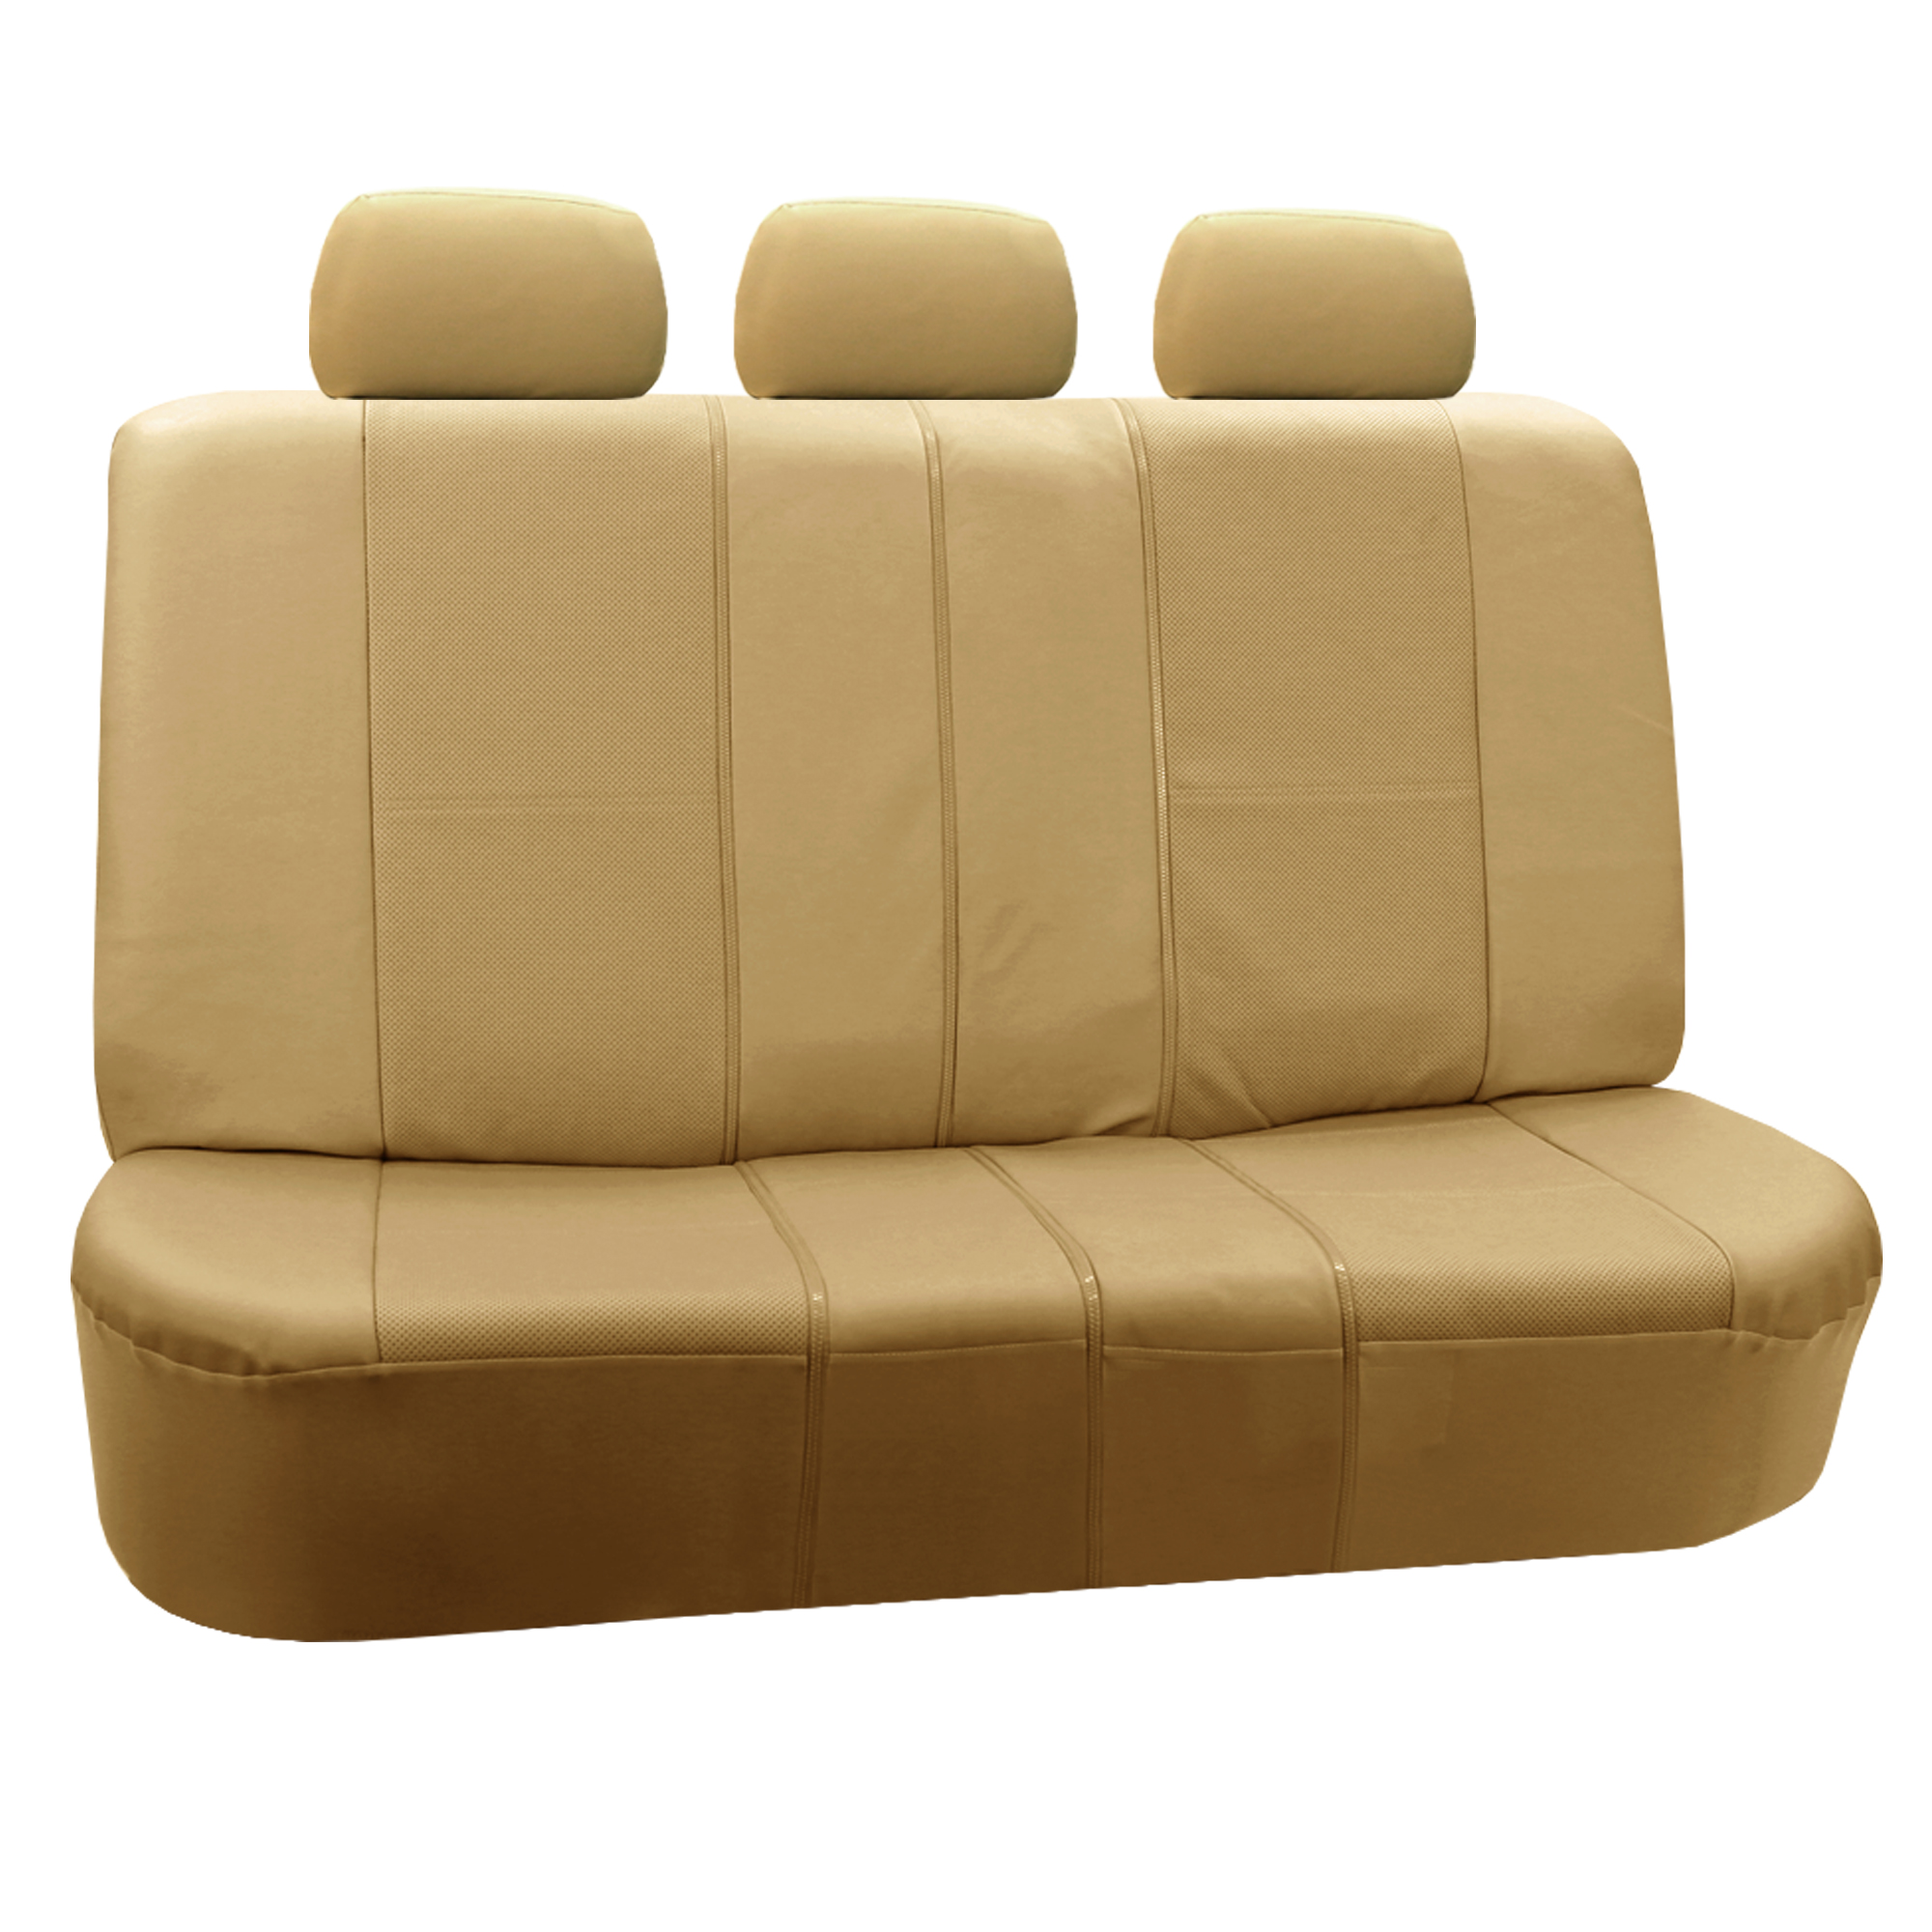 FH Group Beige Deluxe Faux Leather Airbag Compatible and Split Bench Car Seat Covers, 8 Seater 3 Row Full Set - image 4 of 6